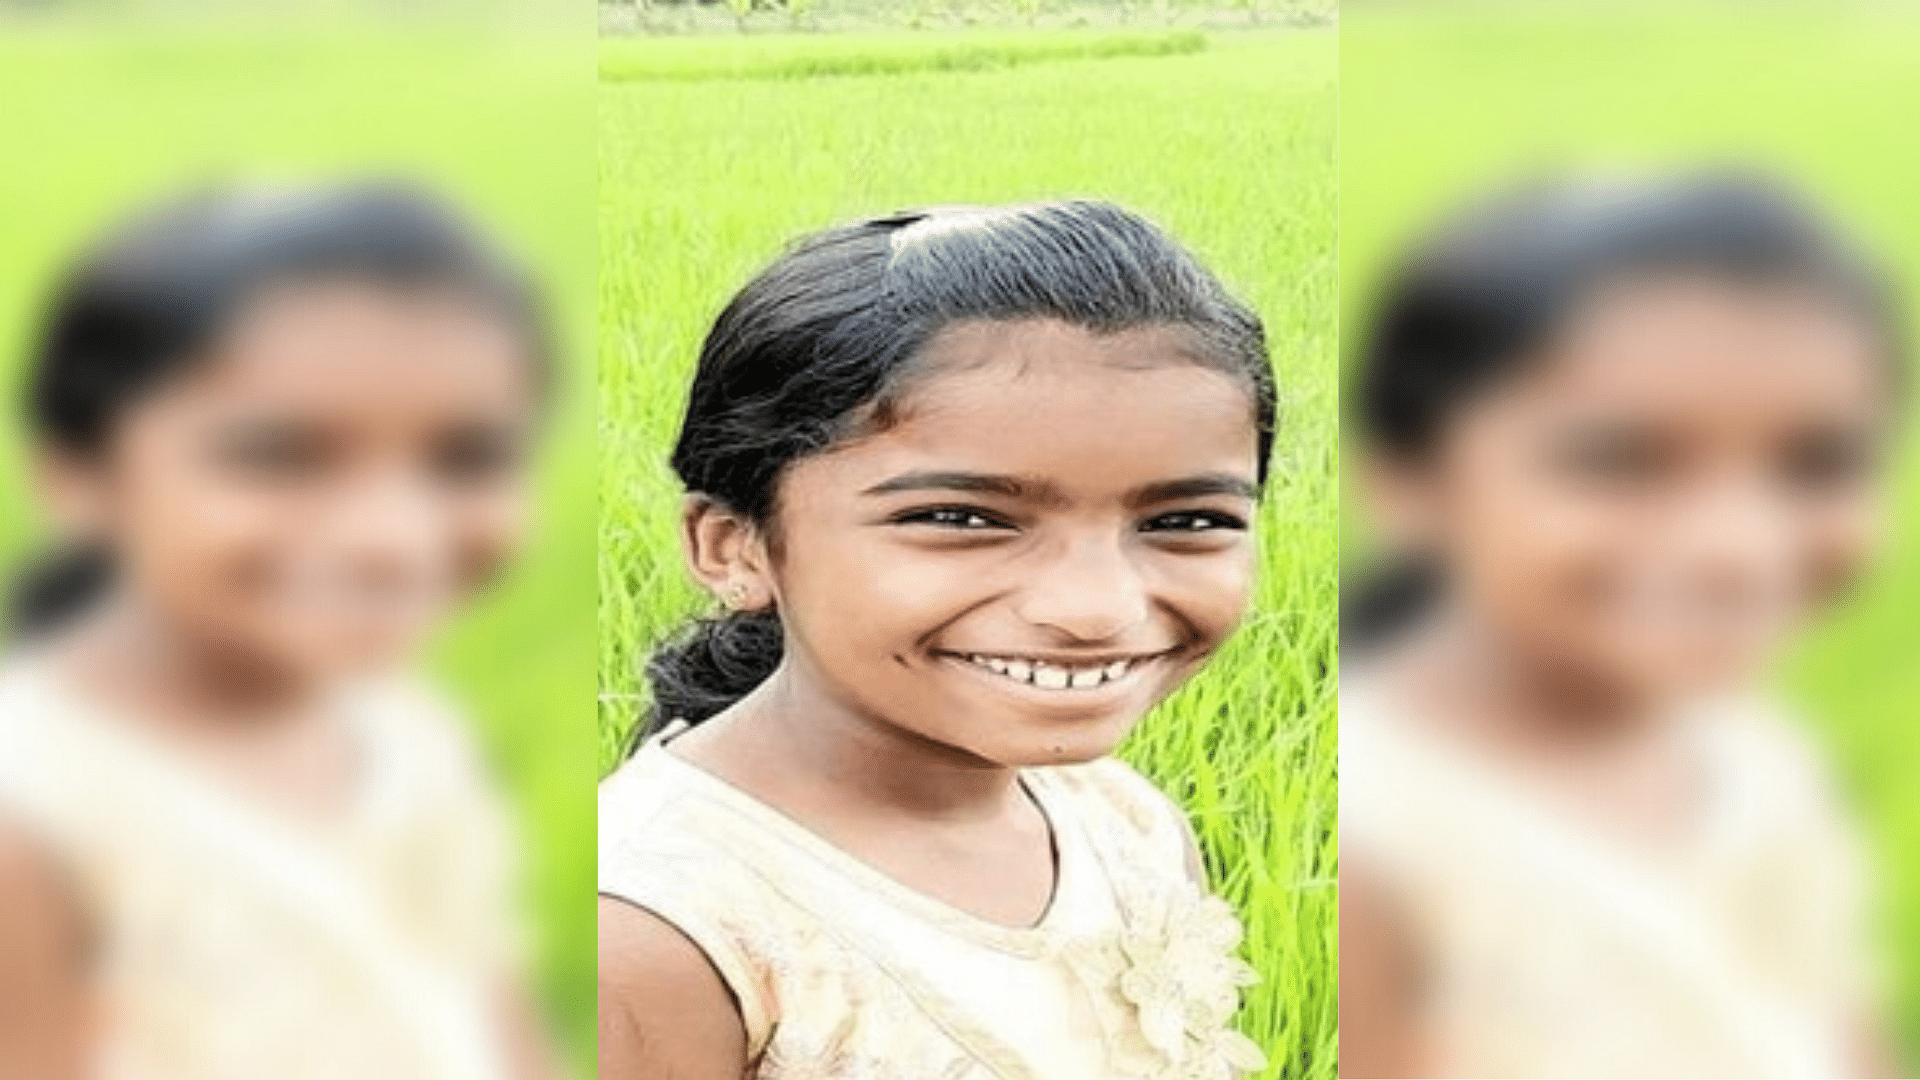 10-year-old Shehala Sherin died after being bitten by a snake inside her classroom at Sultan Bathery in Wayanad.